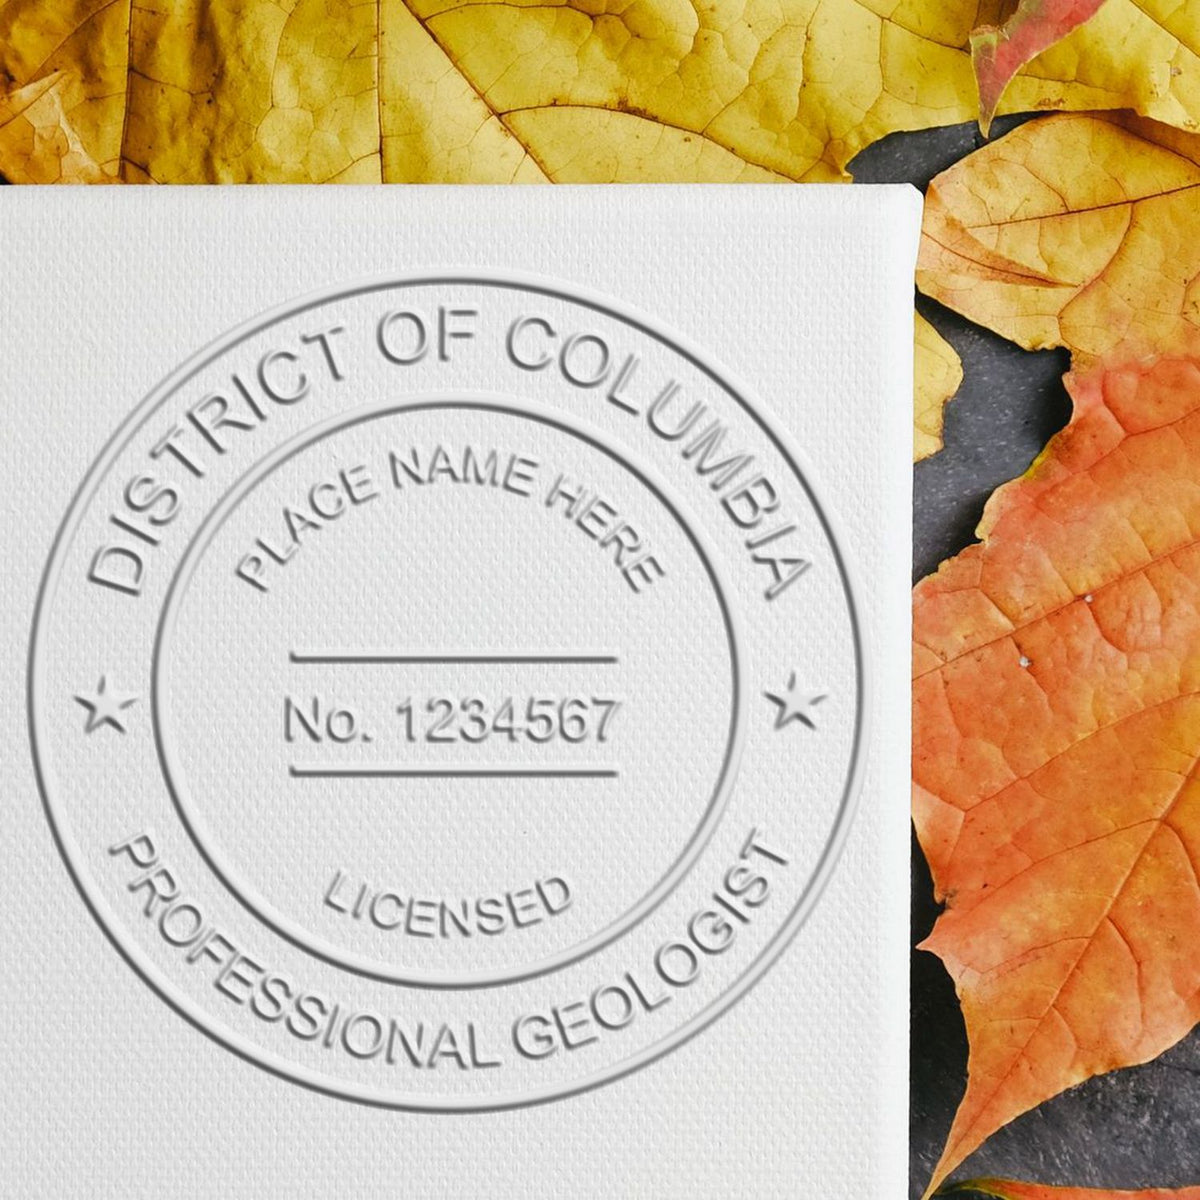 An alternative view of the State of District of Columbia Extended Long Reach Geologist Seal stamped on a sheet of paper showing the image in use